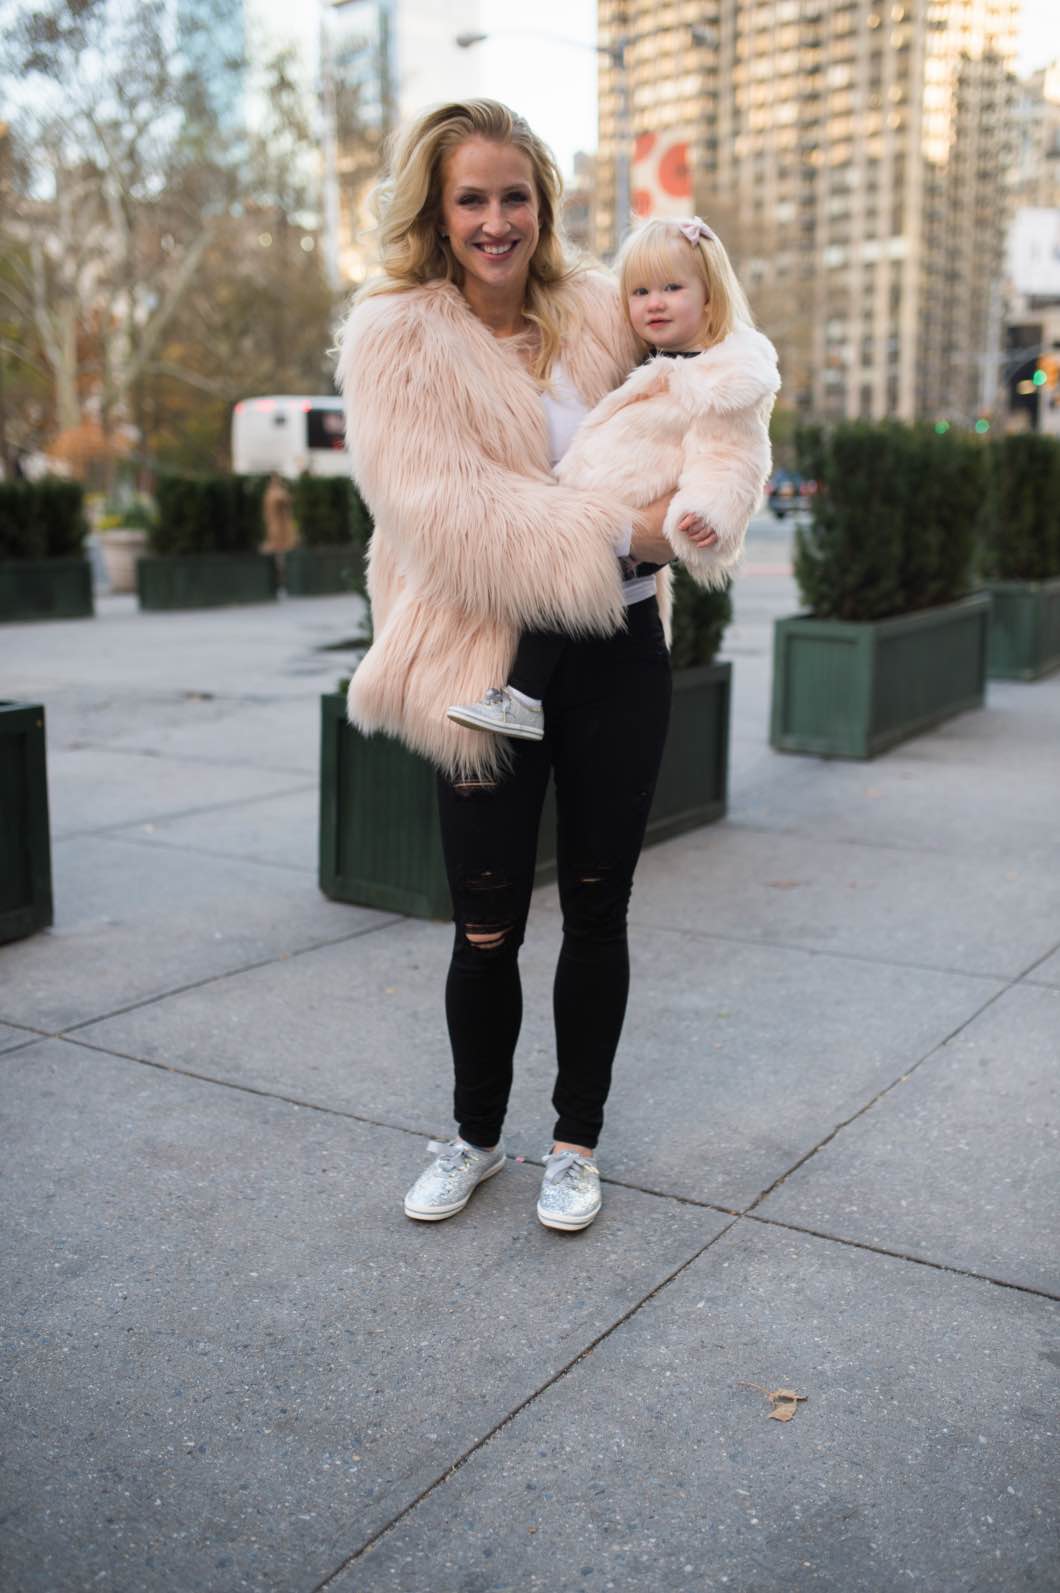 mother and daughter matching winter outfits